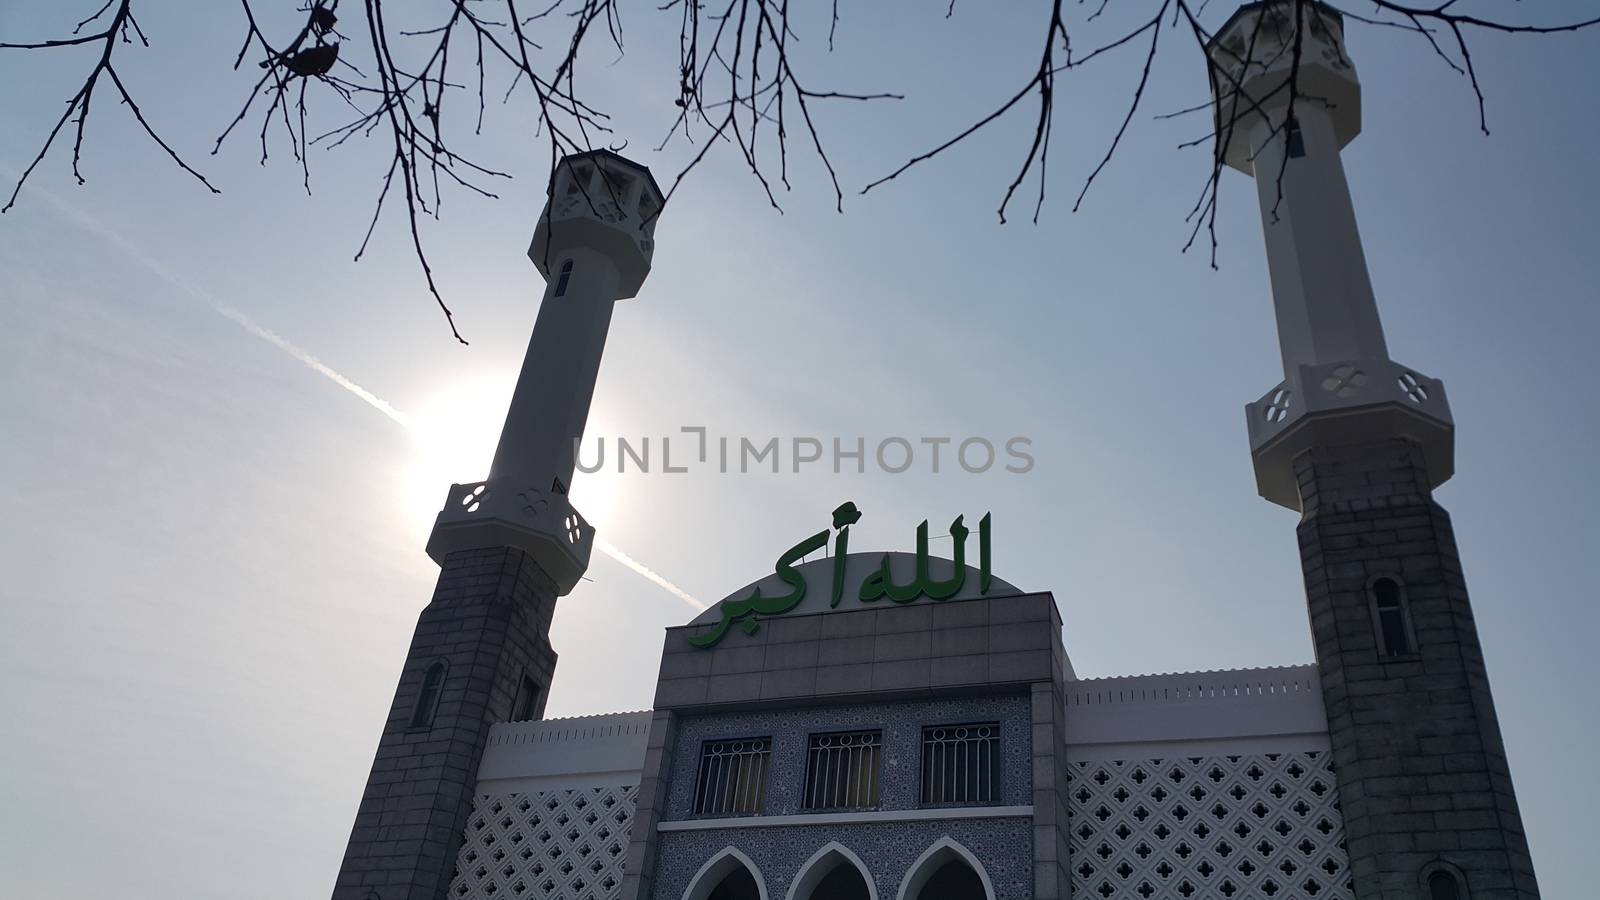 Seoul, South Korea - February 12, 2019:  Seoul Central Mosque, the first and biggest Islamic mosque in South Korea located in Itaewon Dong area. It has minerates and Letters with Allahu Akbar which means "Allah is the greatest".